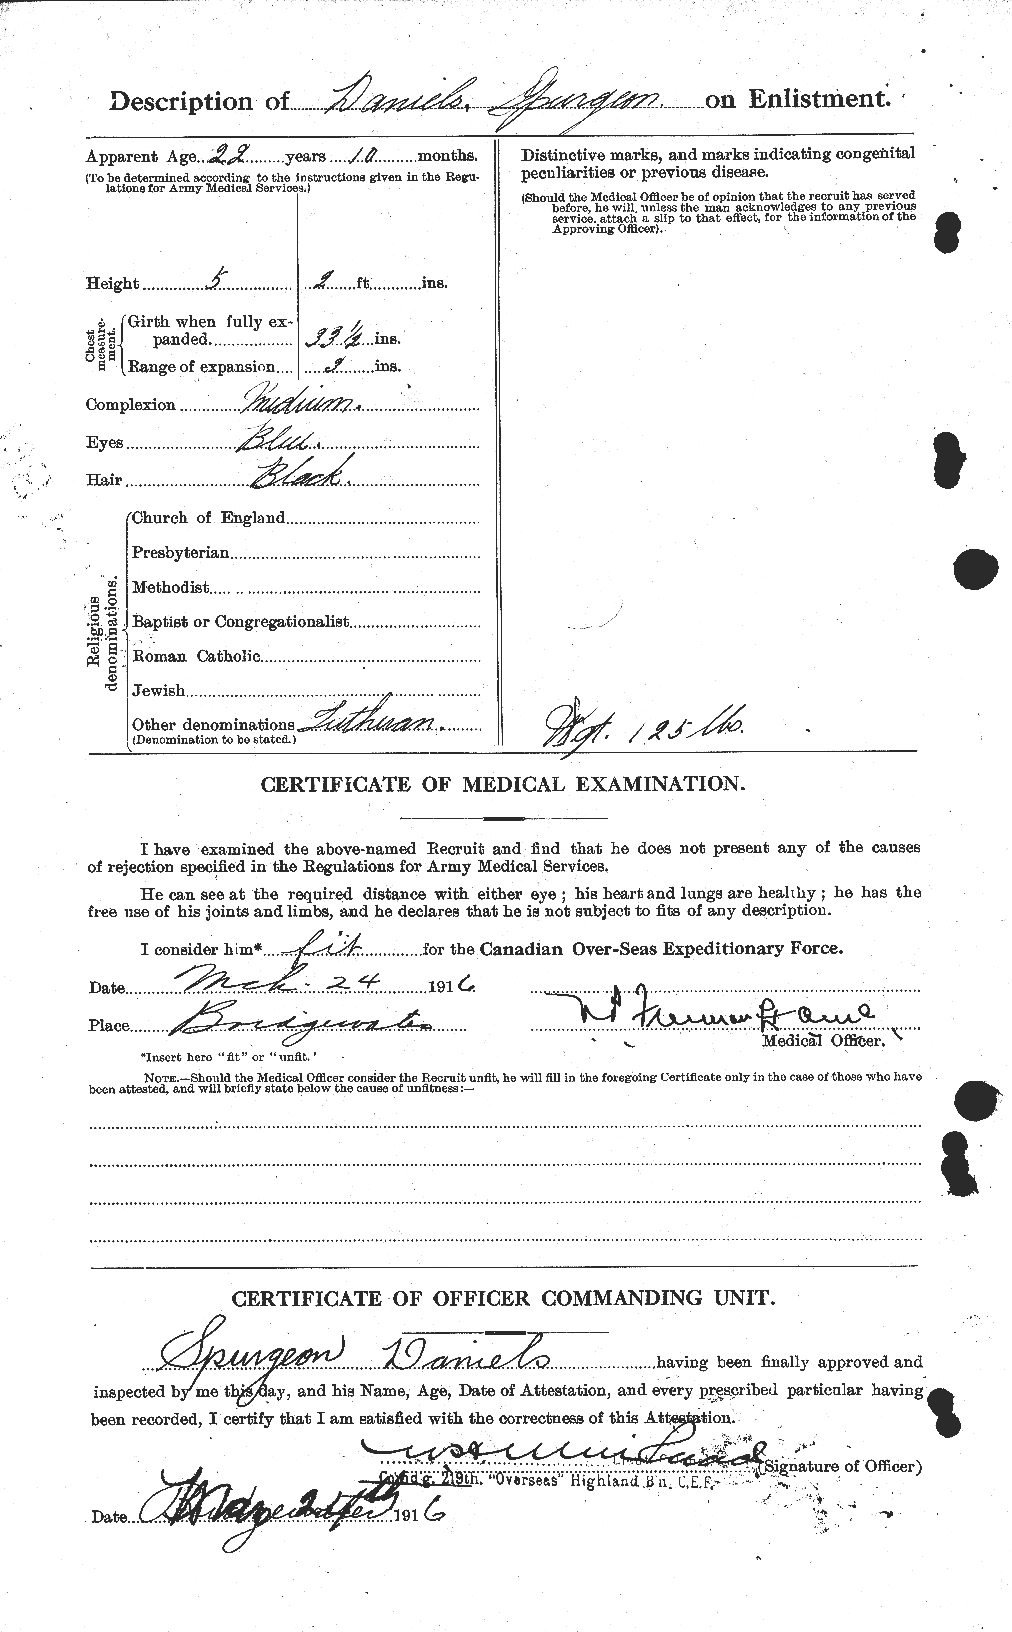 Personnel Records of the First World War - CEF 279672b